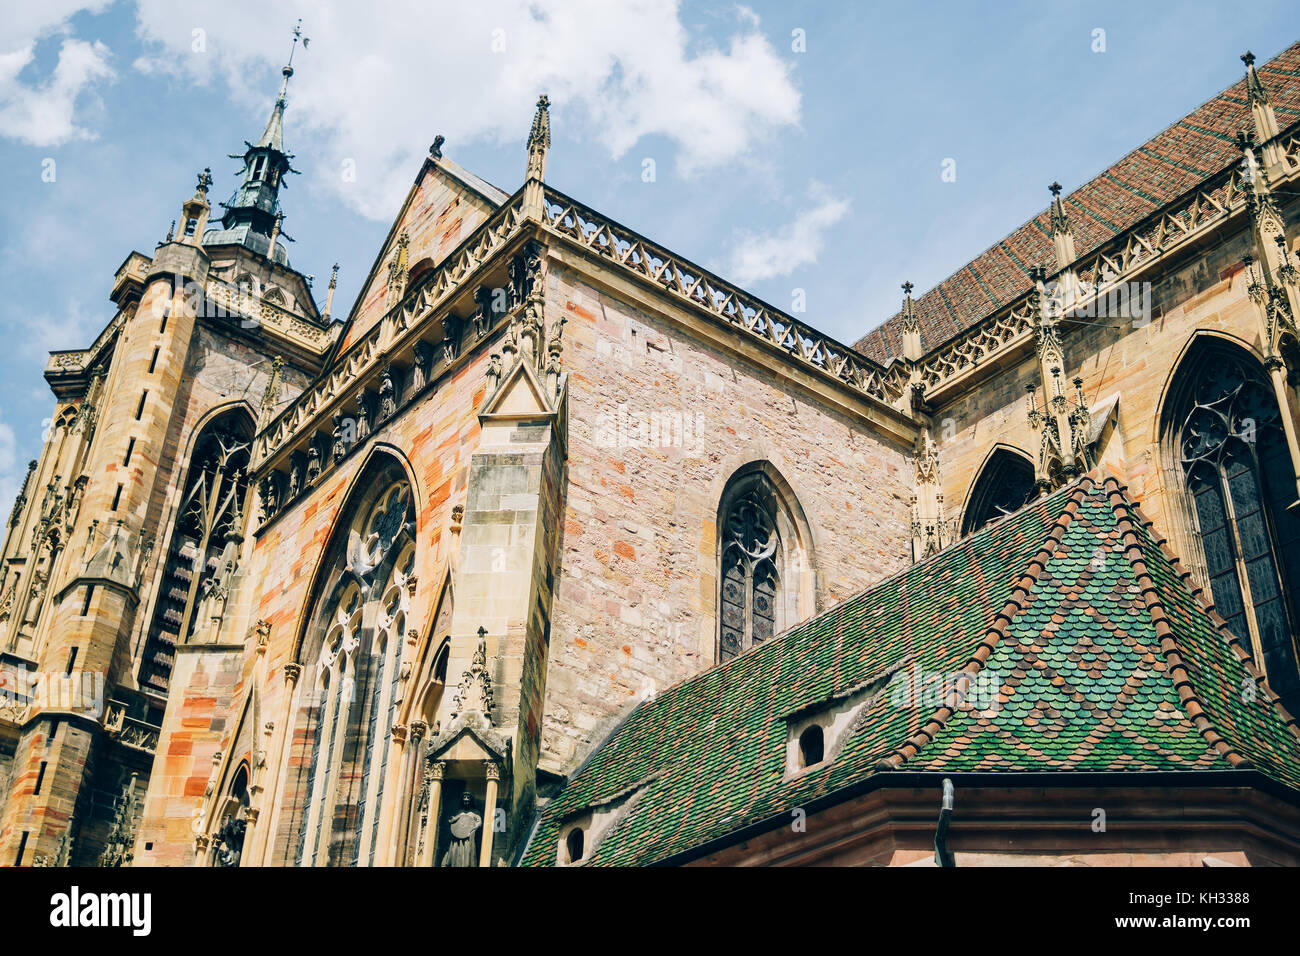 Low angle view of the catherdral in Colmar, France Stock Photo